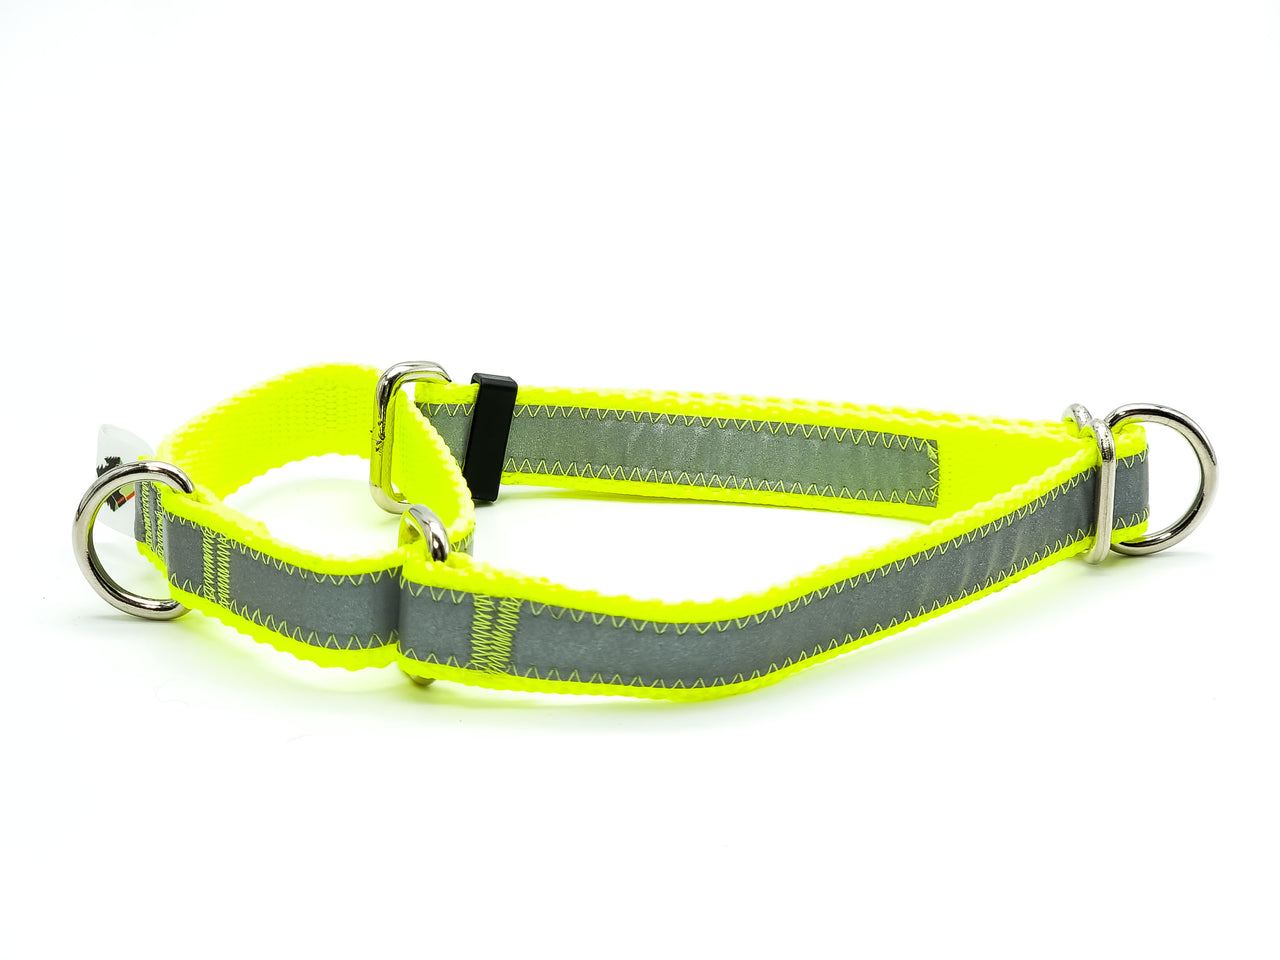 Neon Yellow Reflective Martingale - Medium 12"-18" in 3/4" wide